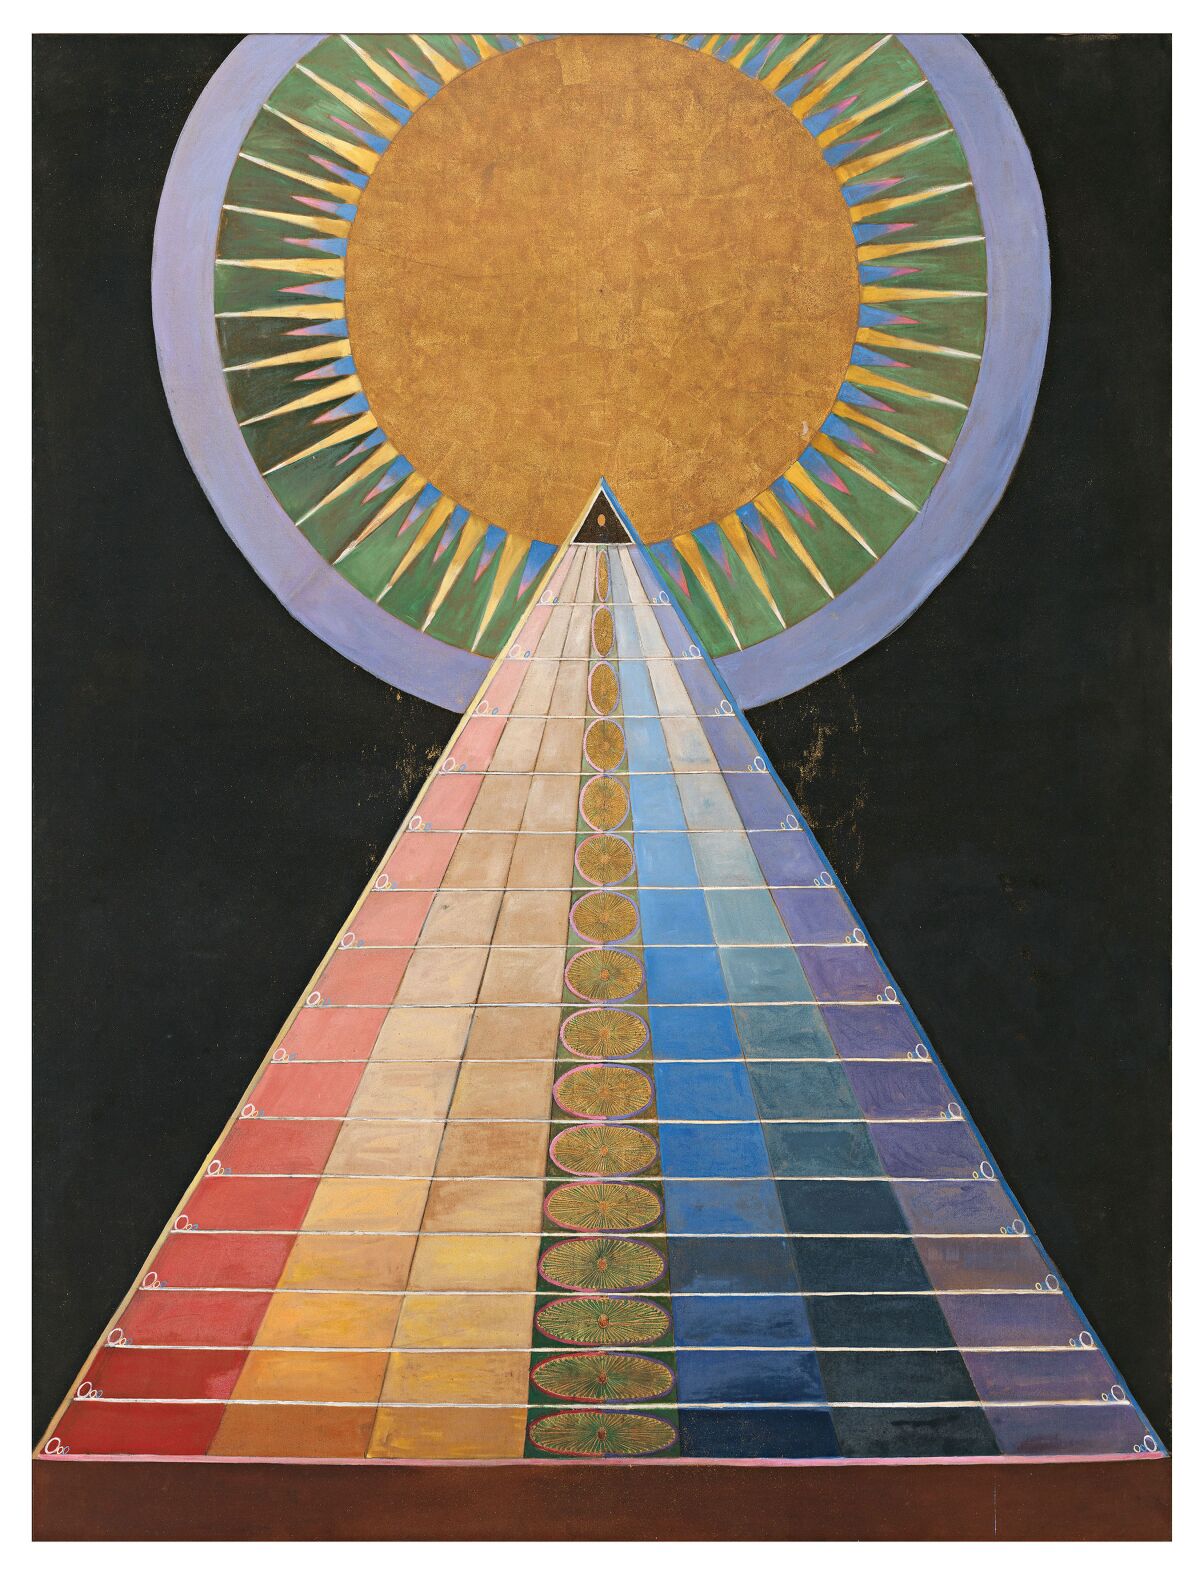 In 1915, Hilma af Klint made three "Altarpiece" paintings for a temple to spiritual enlightenment that was never built.